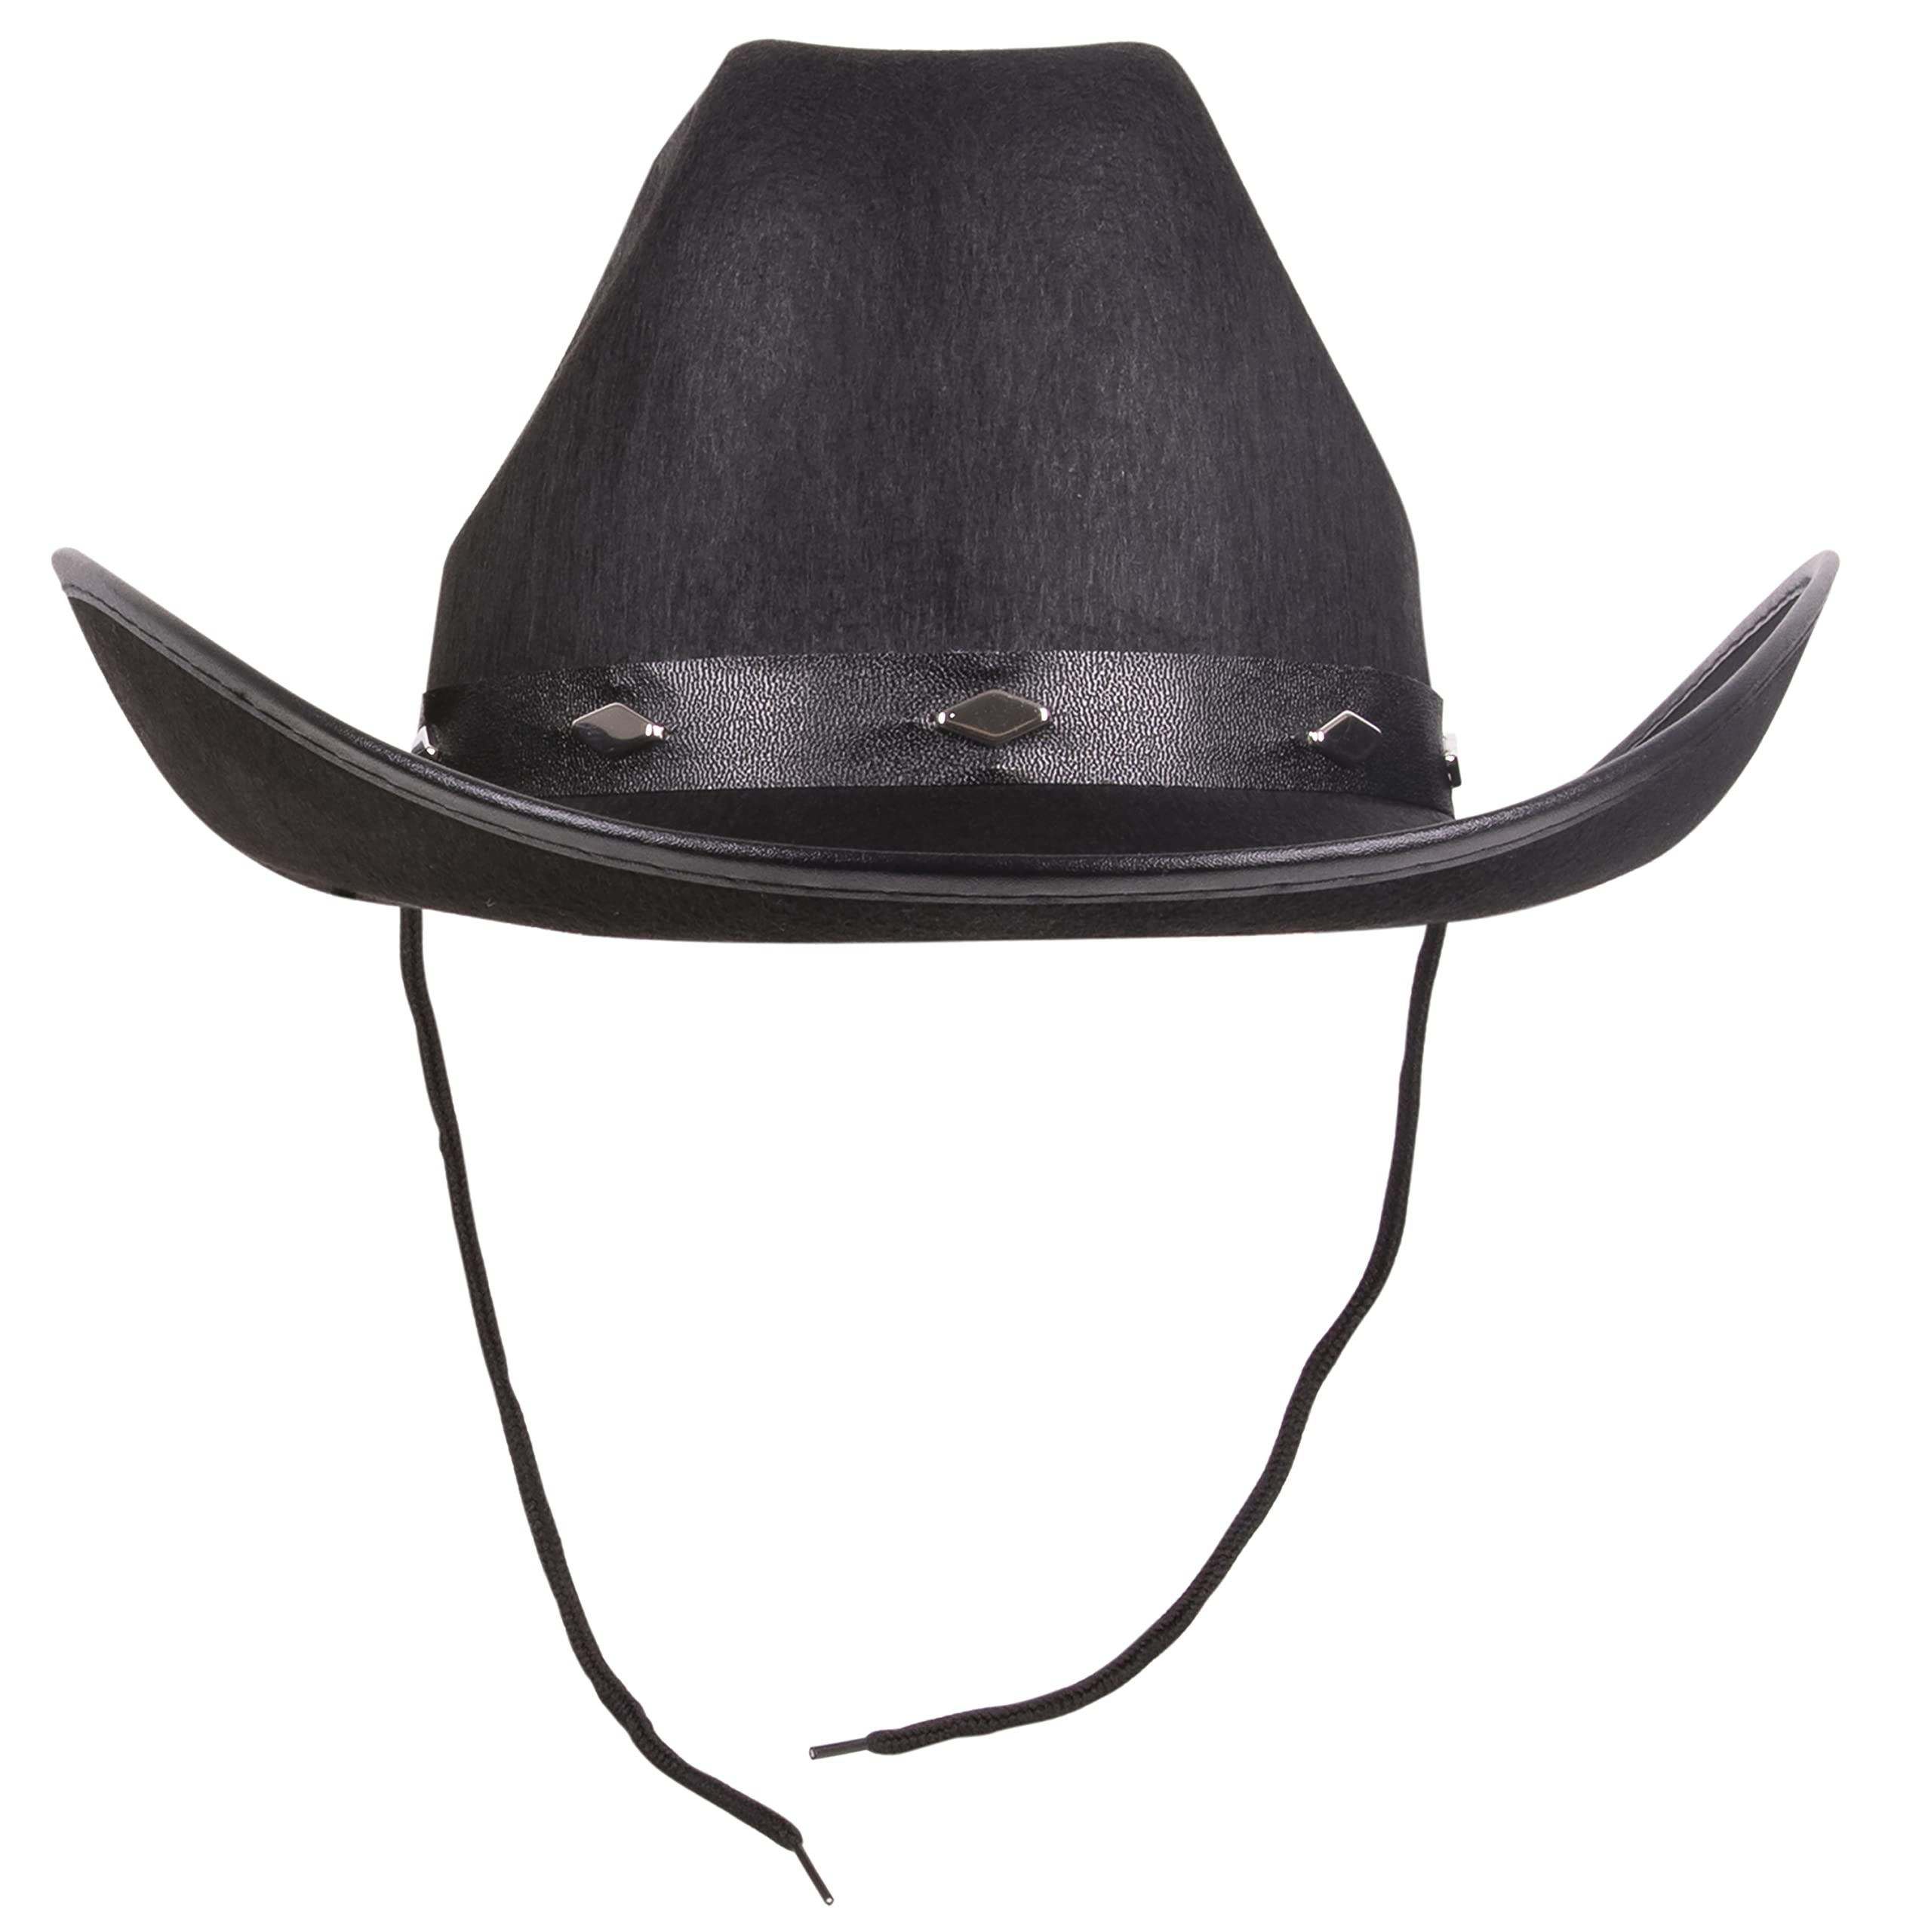 Kangaroo - Cowboy Hat with Pull-on Closure, Felt Cowboy Hat for Real Cowboys or Costume Party - Adult’s Cowboy & Cowgirl Hat